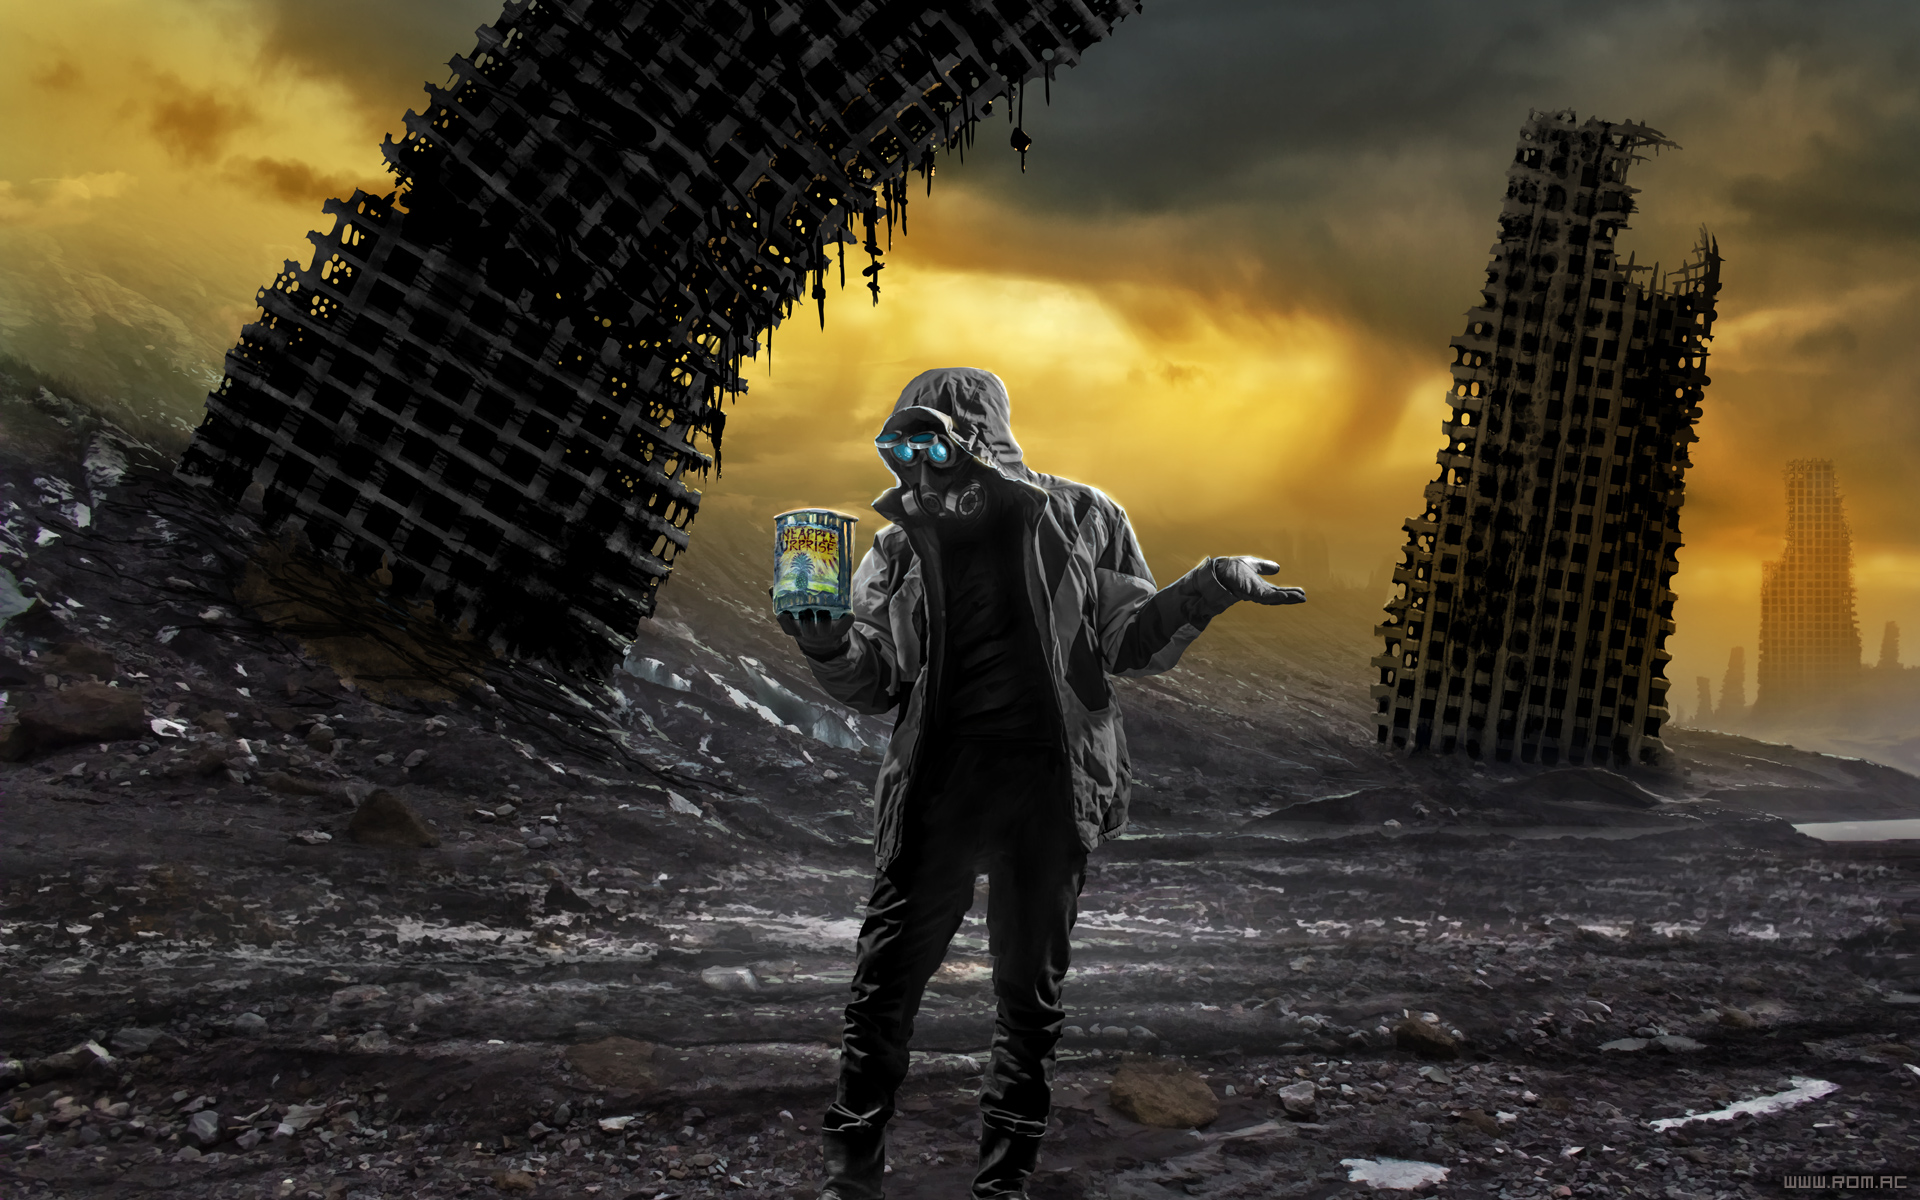 General 1920x1200 Romantically Apocalyptic digital art apocalyptic gas masks can ruins